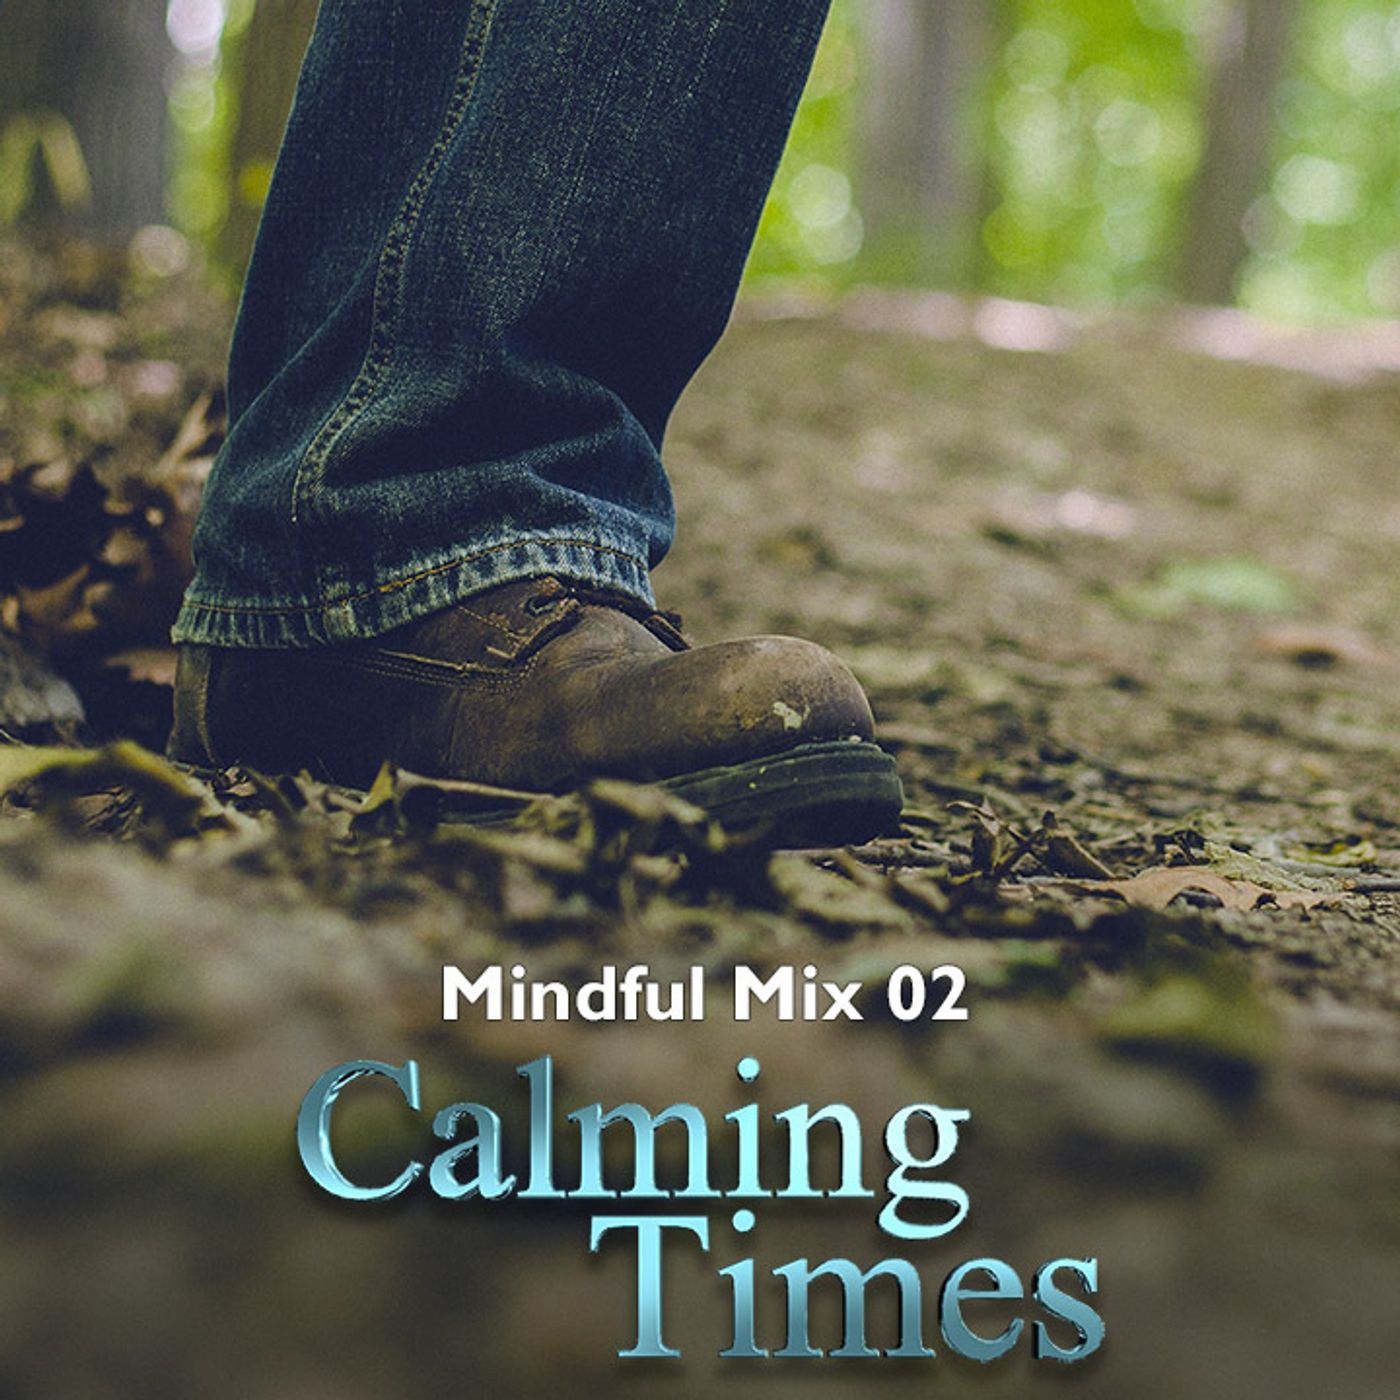 Mindful Mix 02 from Calming Times